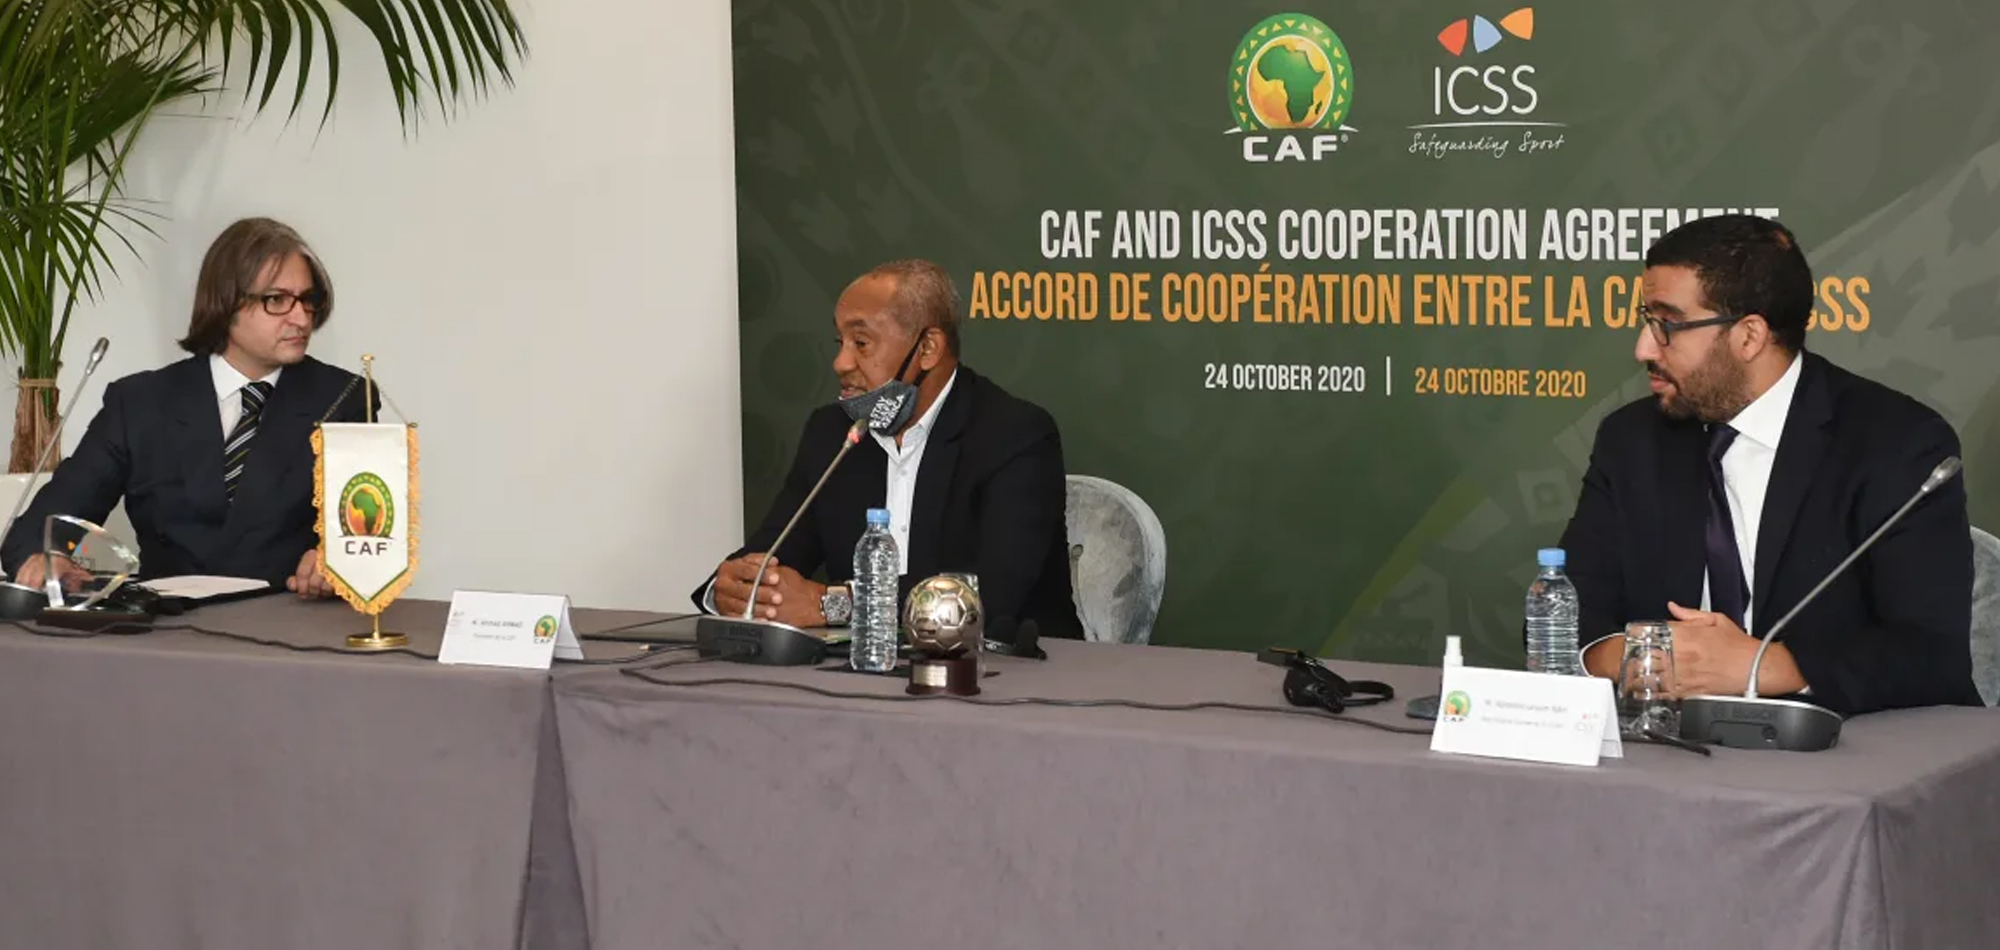 Confederation of African Football (CAF) signs partnership agreement with International Centre for Sport Security (ICSS)